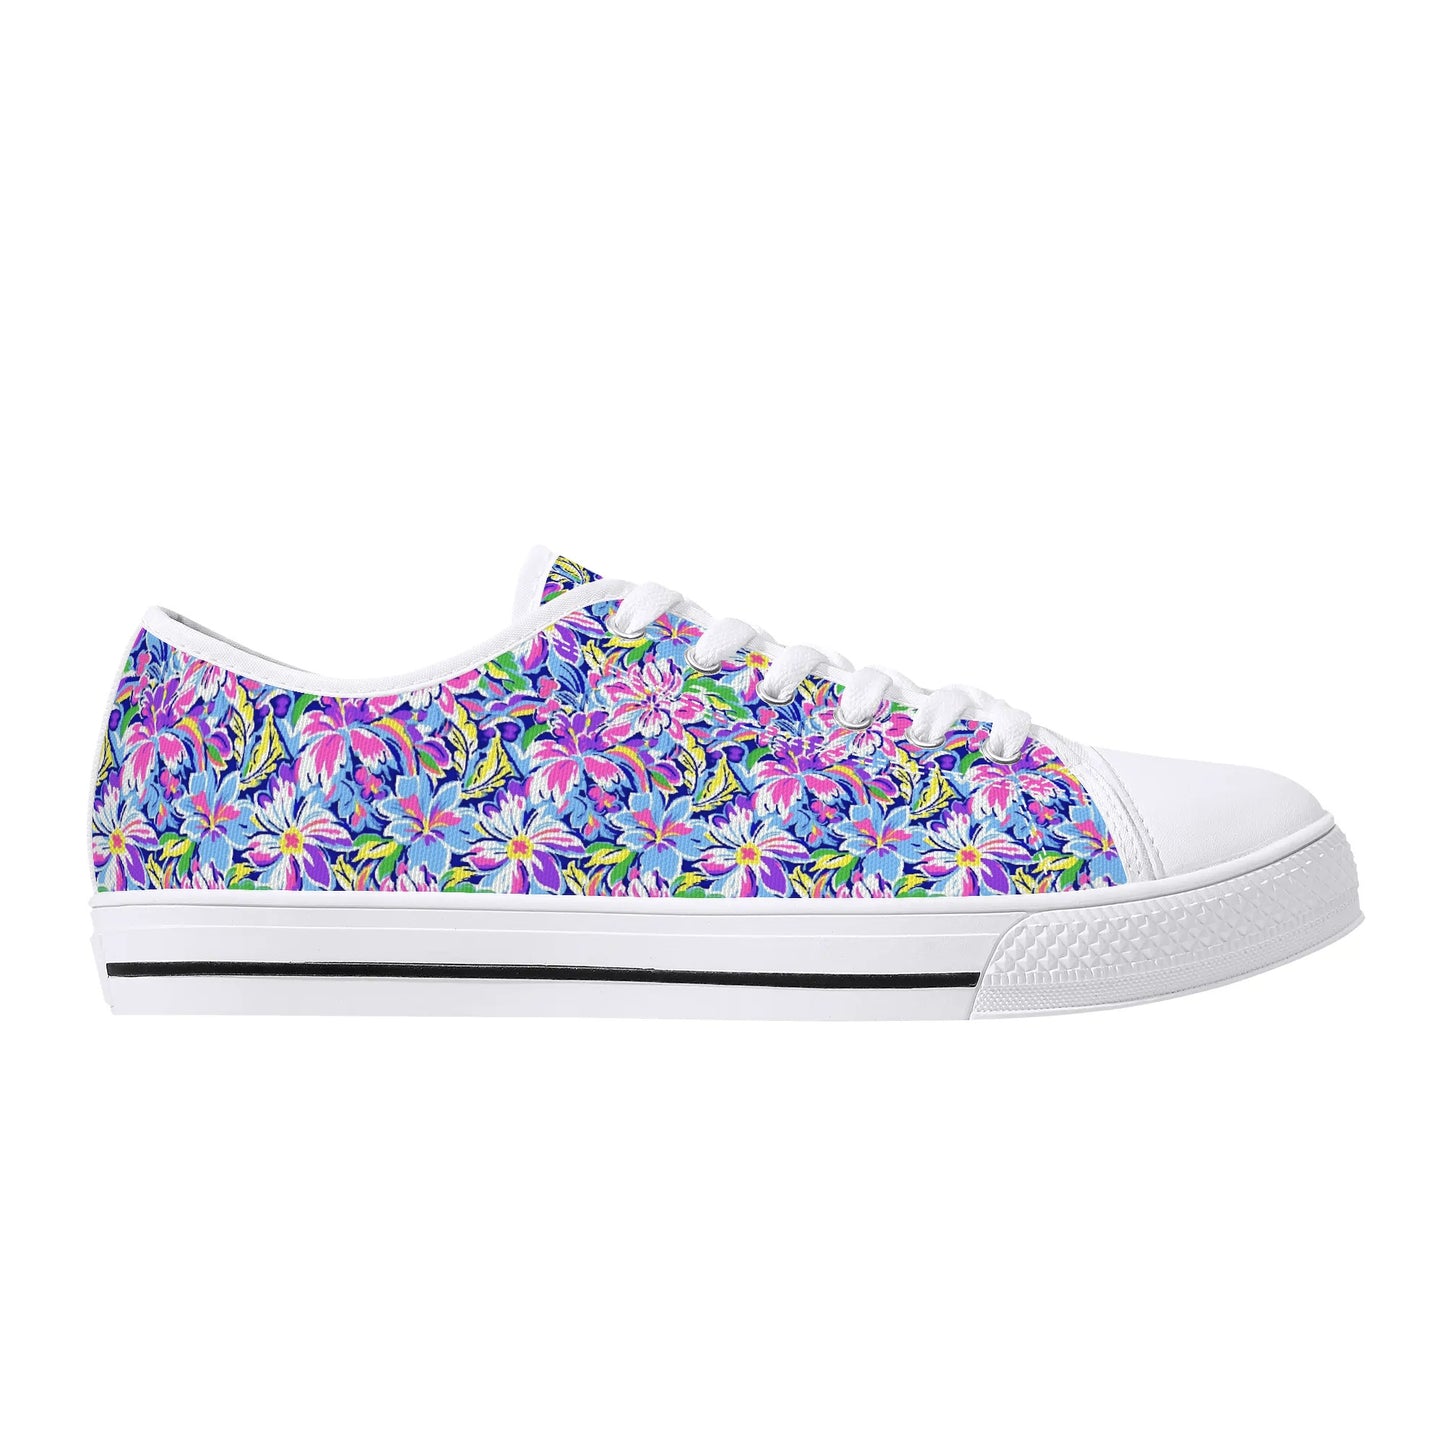 Tropical Burst: Vibrant Summer Flowers in Full BloomWomens Low Top Canvas Sneakers US5.5 - US12